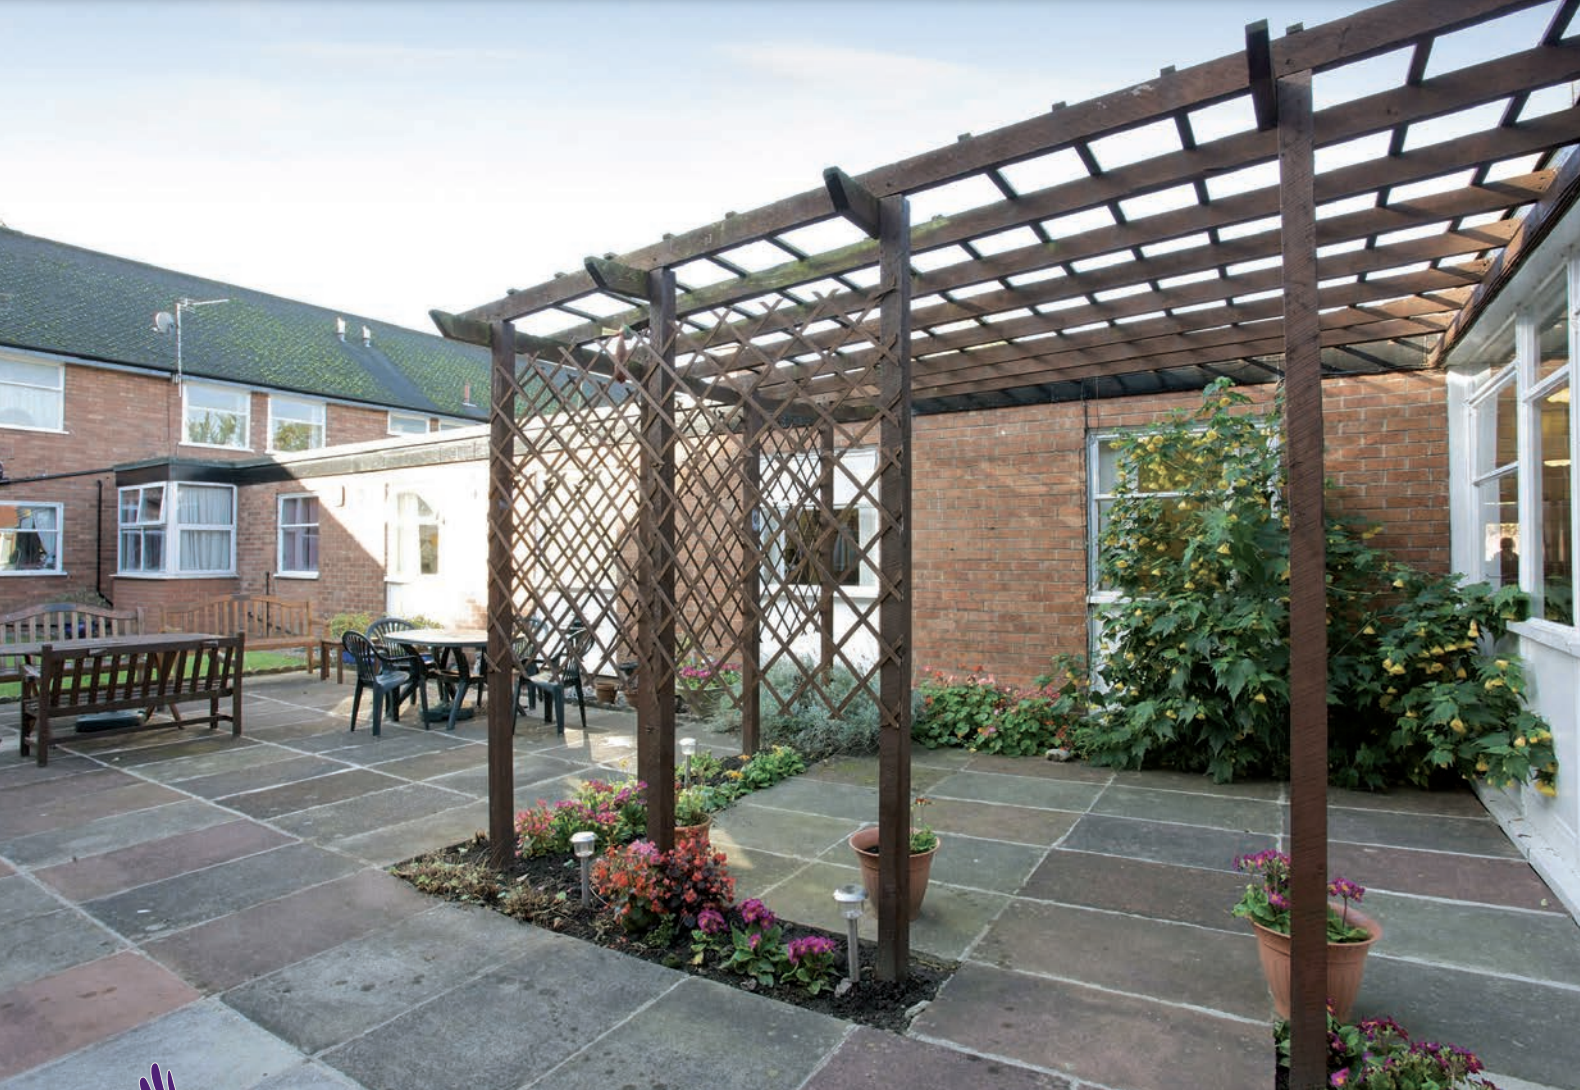 Garden Area of The Hawthorns Care Home in Wilmslow, Cheshire East